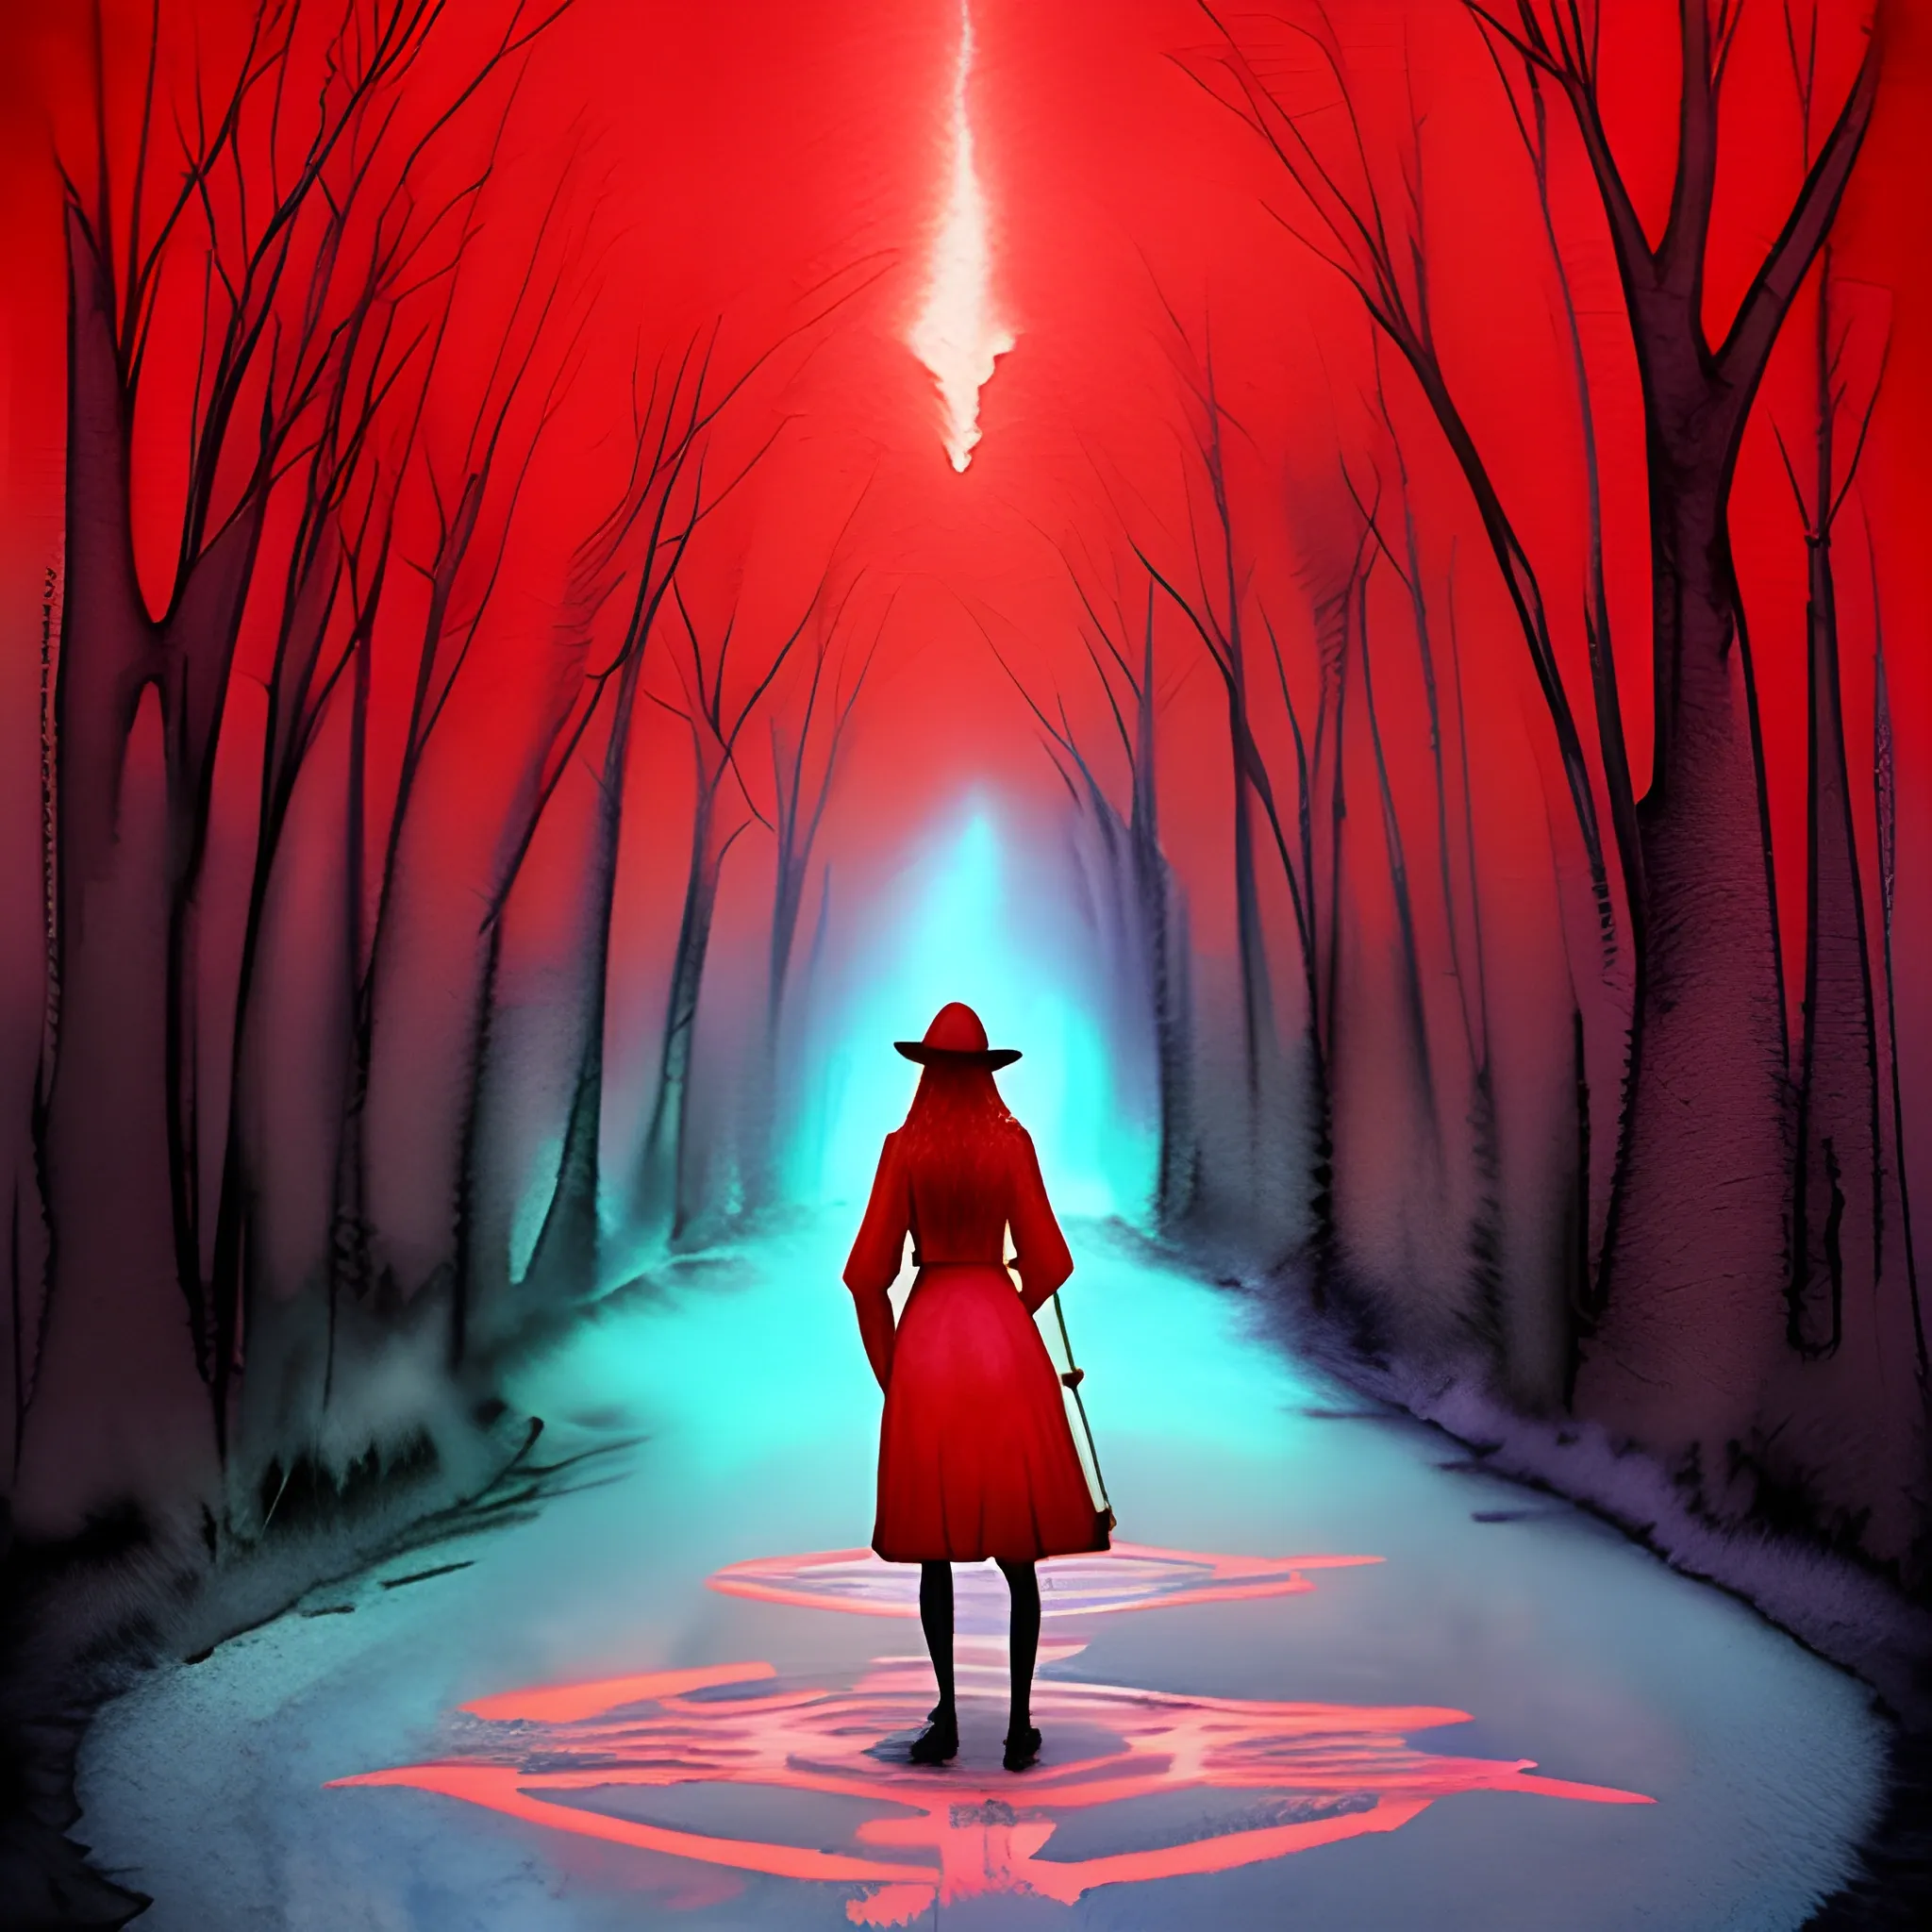 Draw a woman standing at a crossroads of magical paths, with each trail representing a different and mysterious destination. Use a single-color watercolor technique (red) to capture the magical atmosphere of this crossroads in the style of Francisco Garcés, alias Dibujante Nocturno